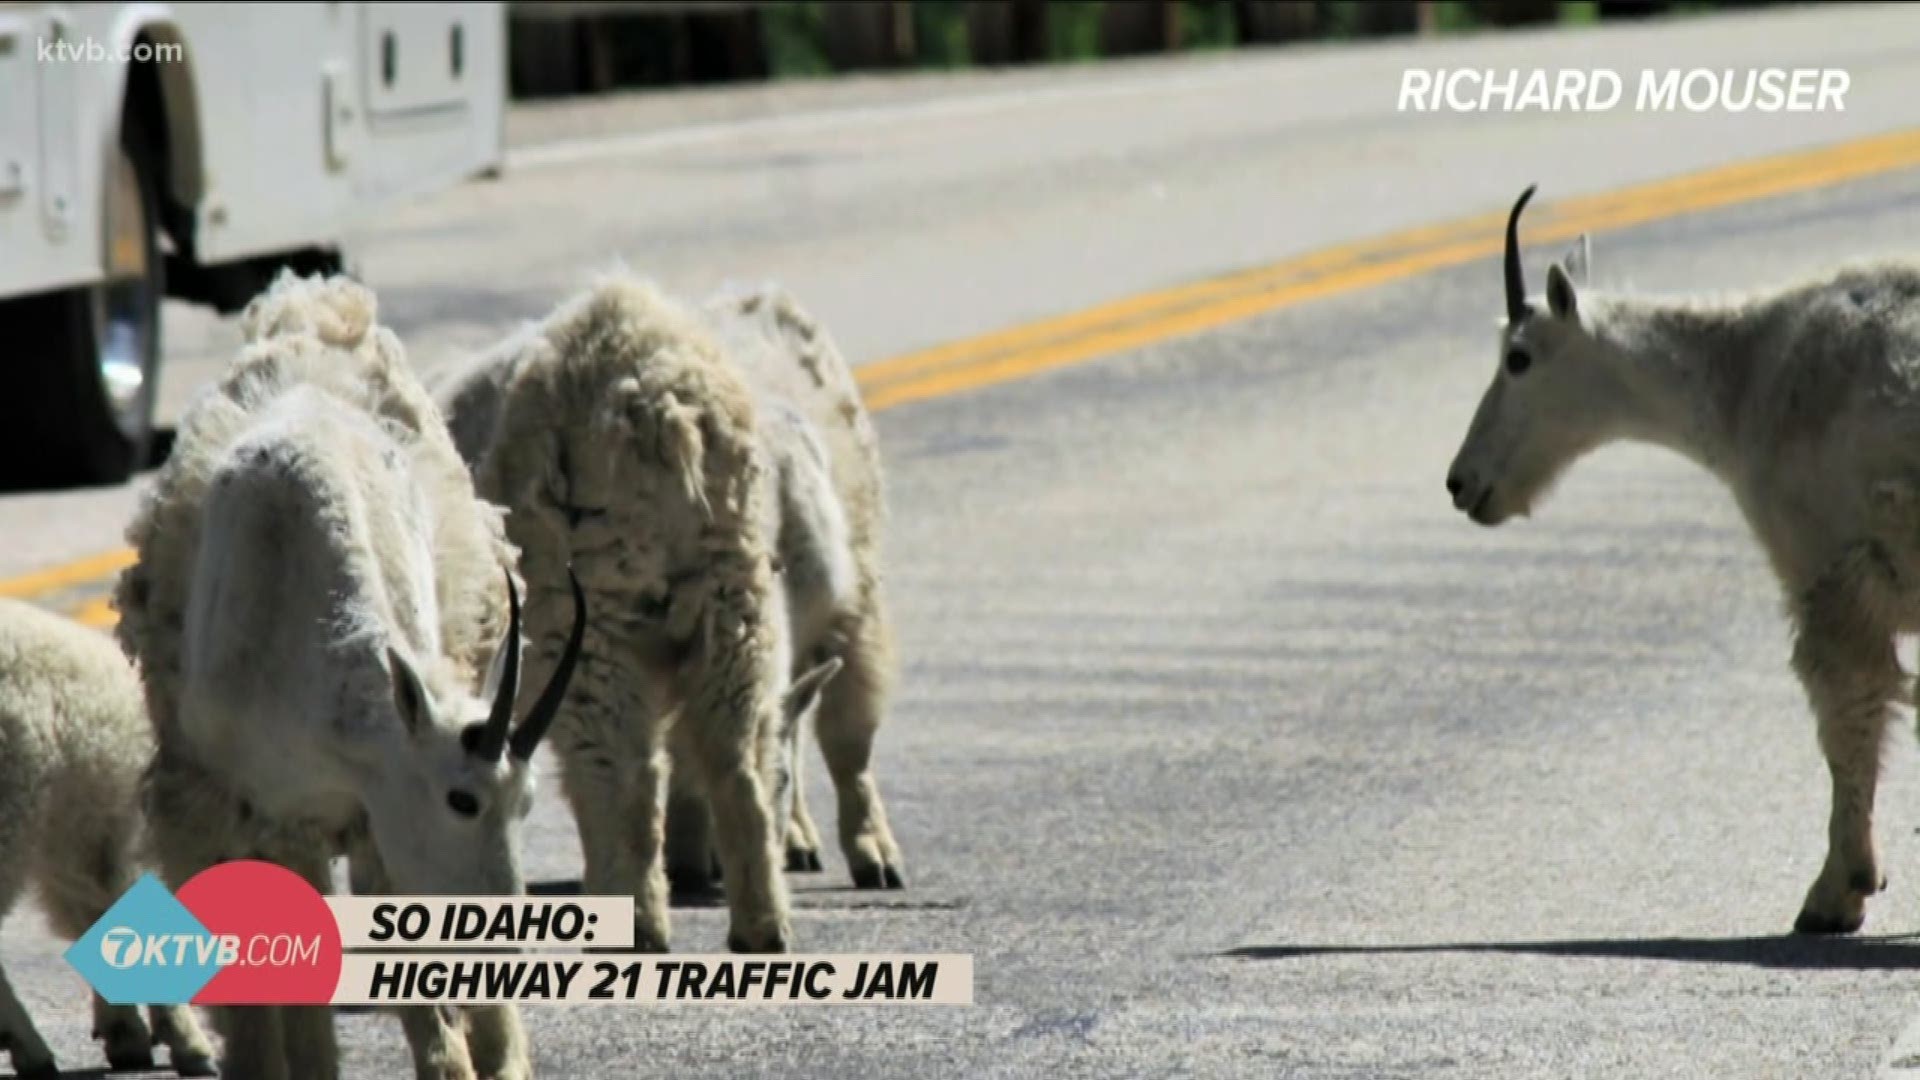 Ricky Mouser came upon the goats in Idaho's mountains and says they didn't want to leave the highway.